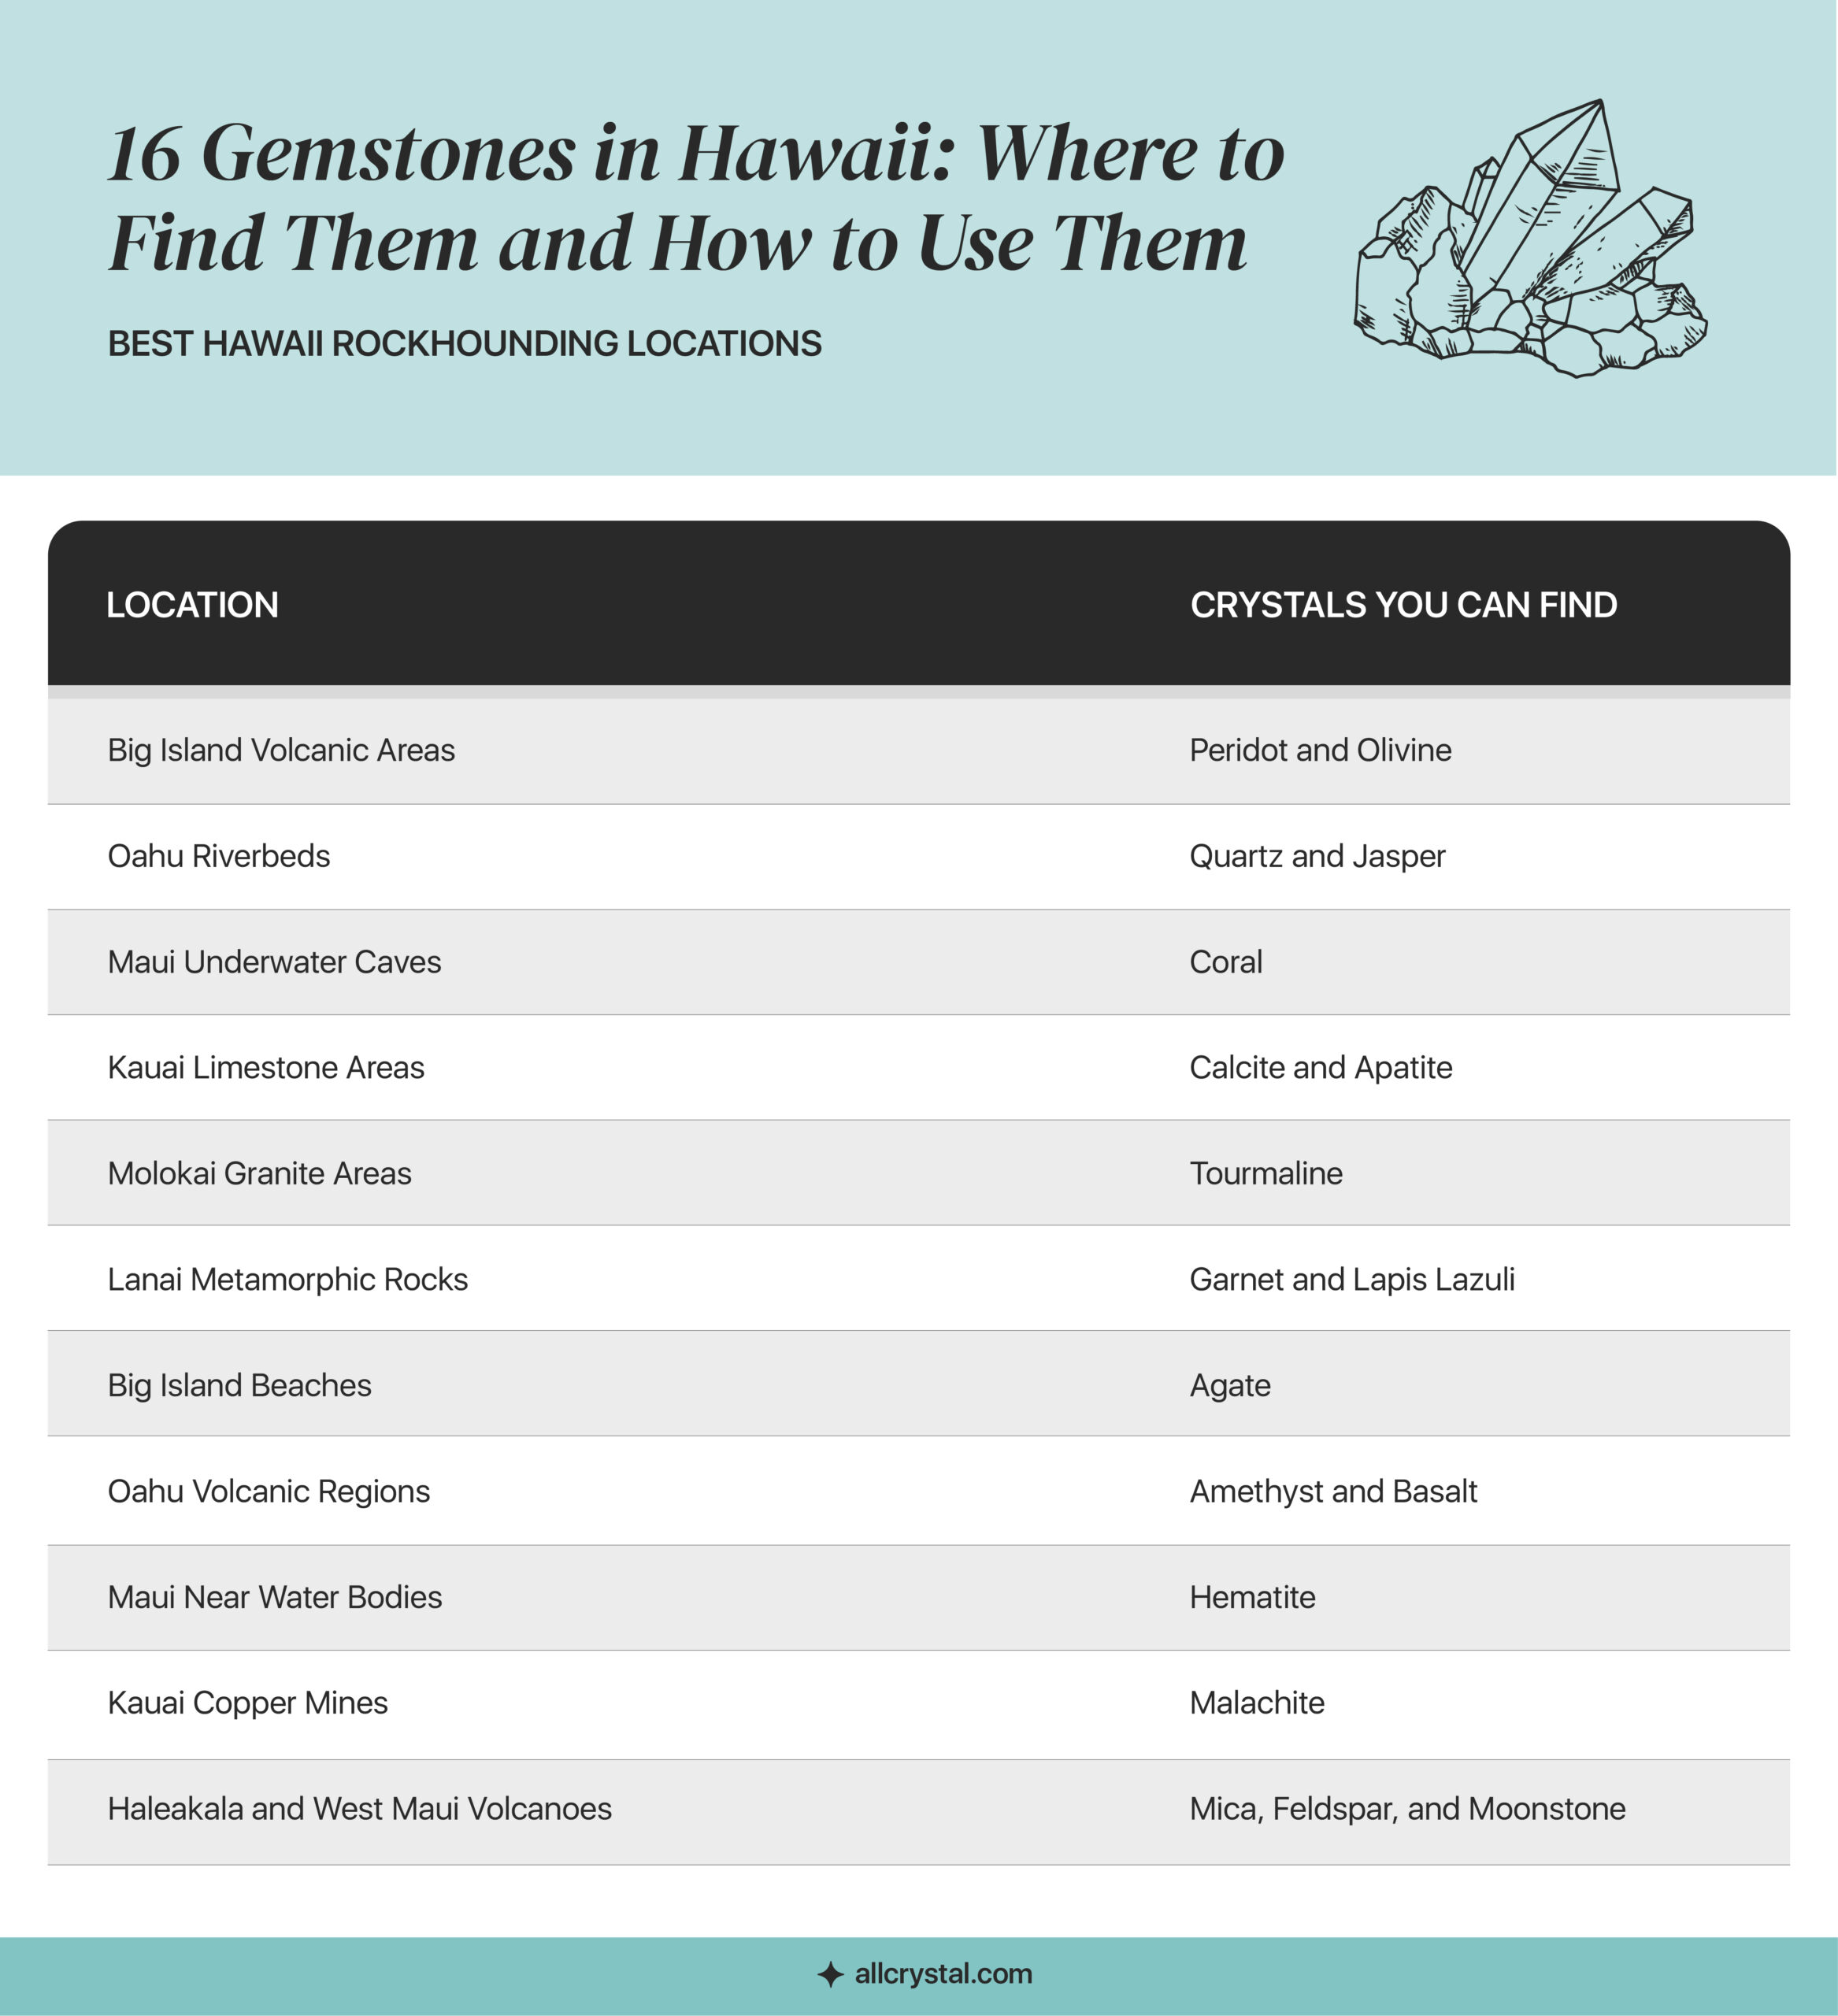 A graphic table containing information about Best Hawaii Rockhounding Locations